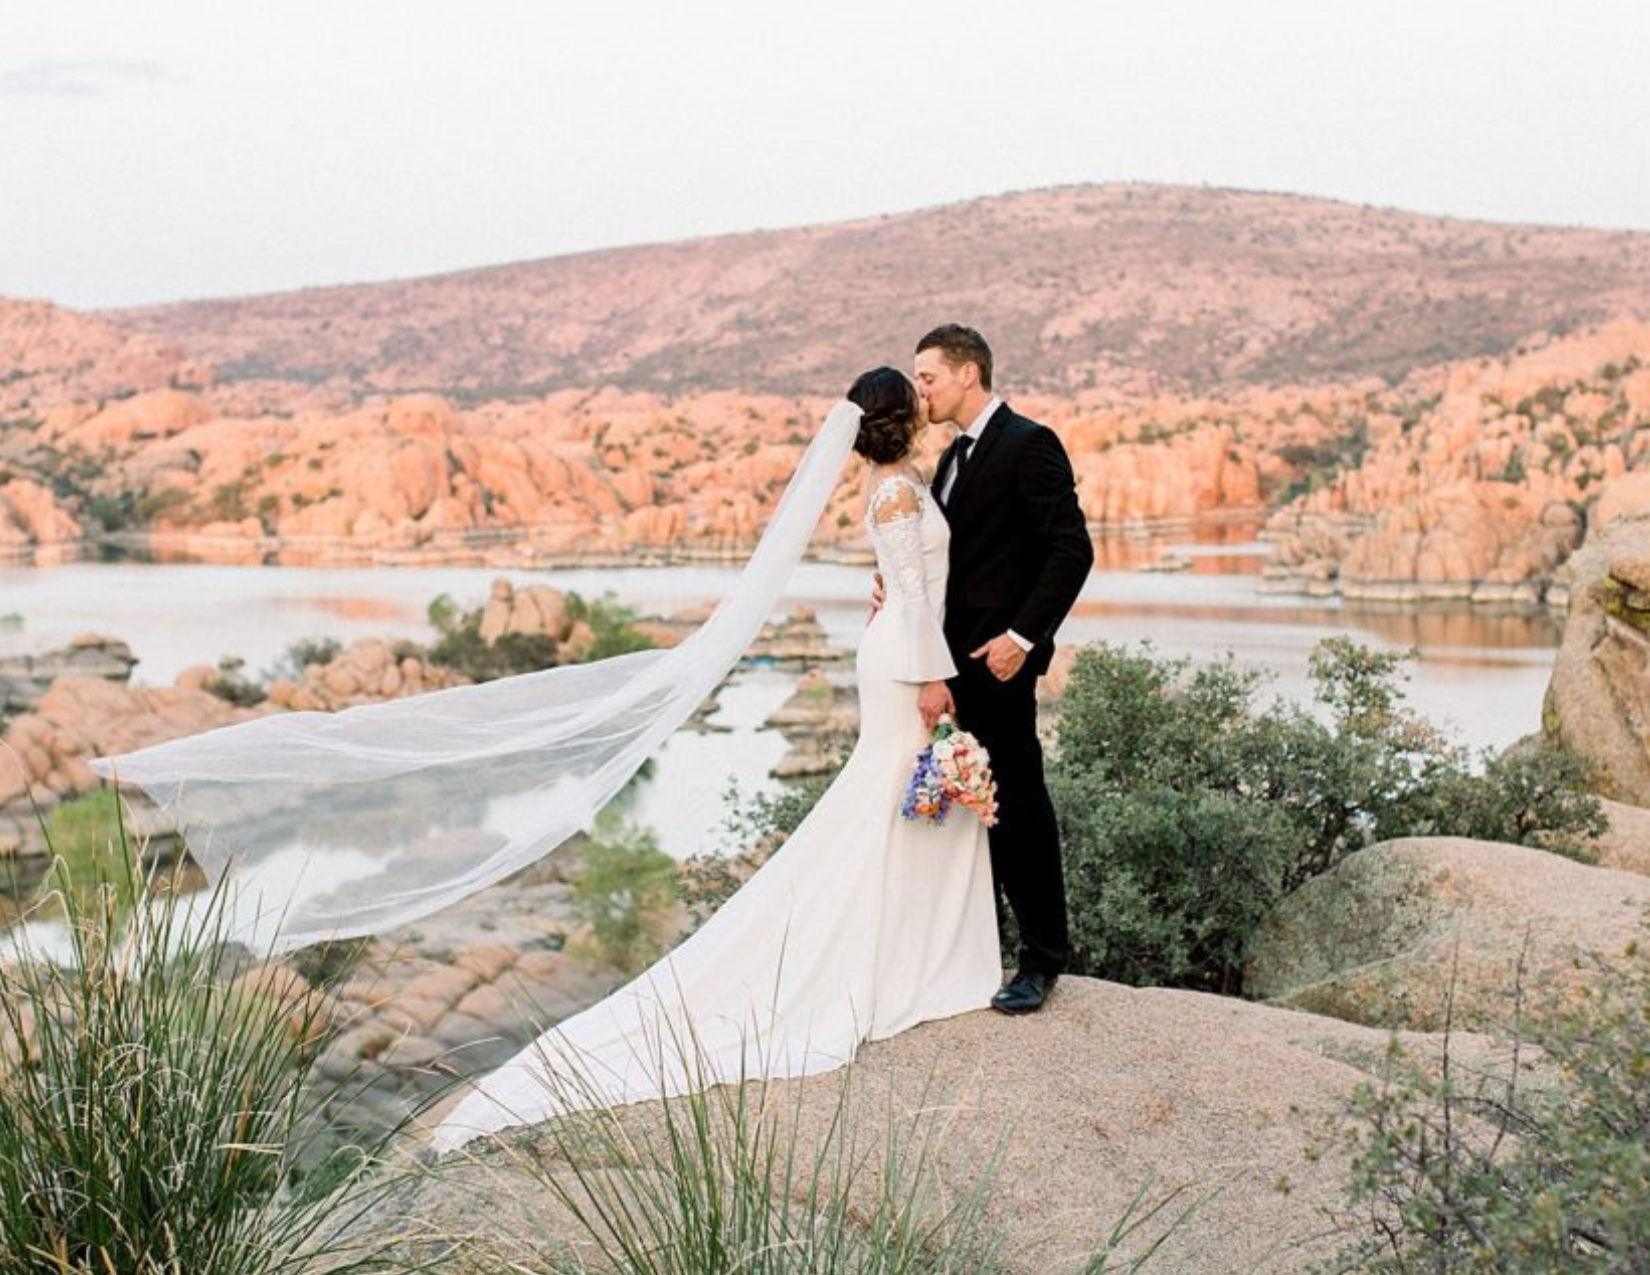 A newly wed couple sharing their first kiss in front of Watson Lake in Prescott, Arizona